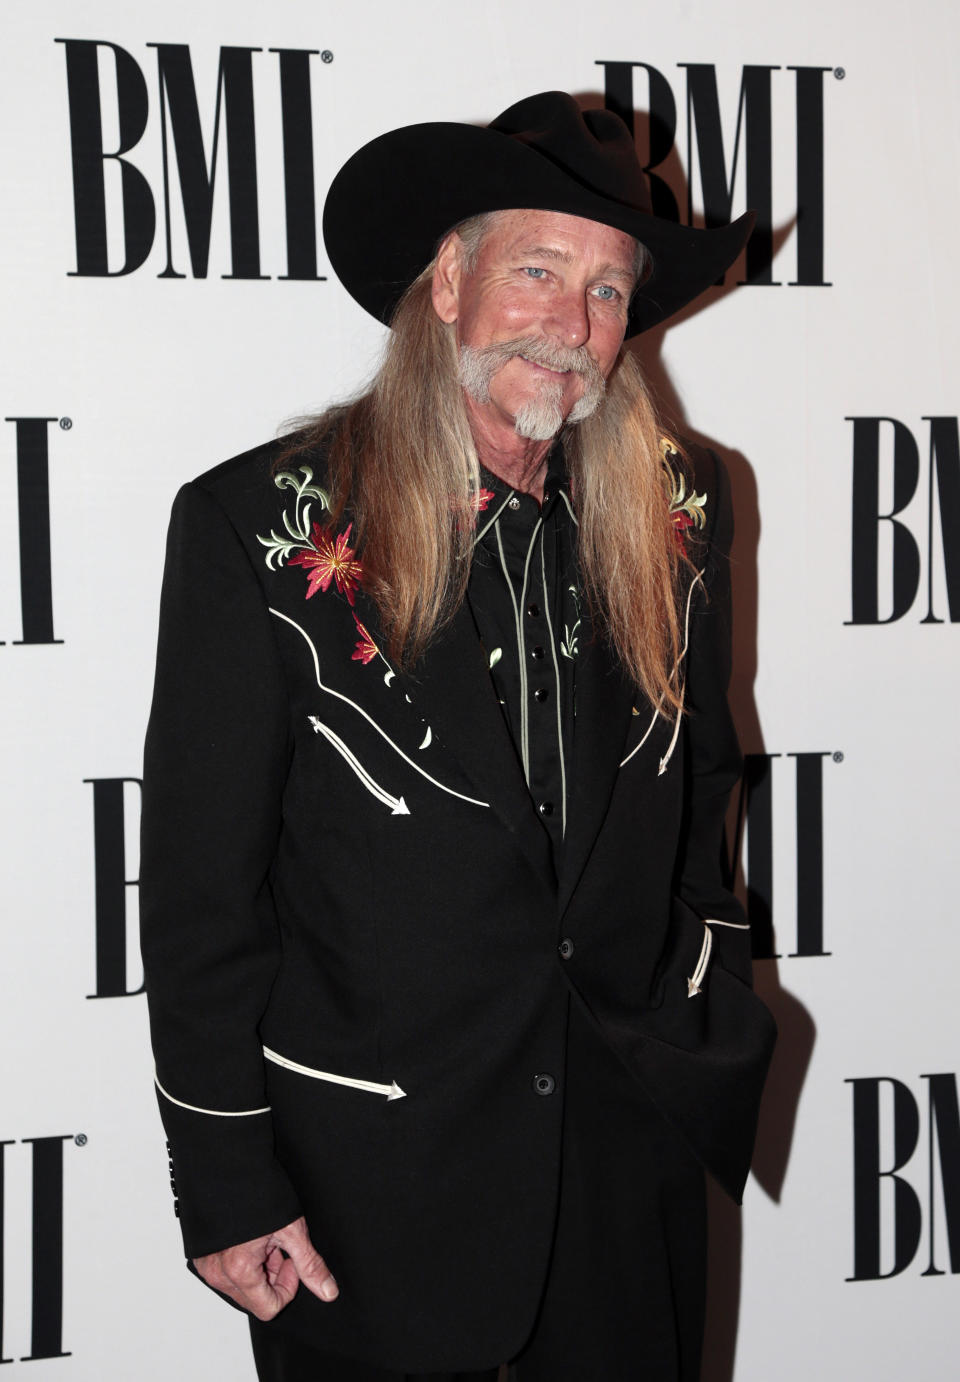 Dean Dillon arrives for the BMI Country Awards on Tuesday, Nov. 5, 2013, in Nashville, Tenn. Dillion is being honored as a BMI Icon at the show. (AP Photo/Mark Humphrey)